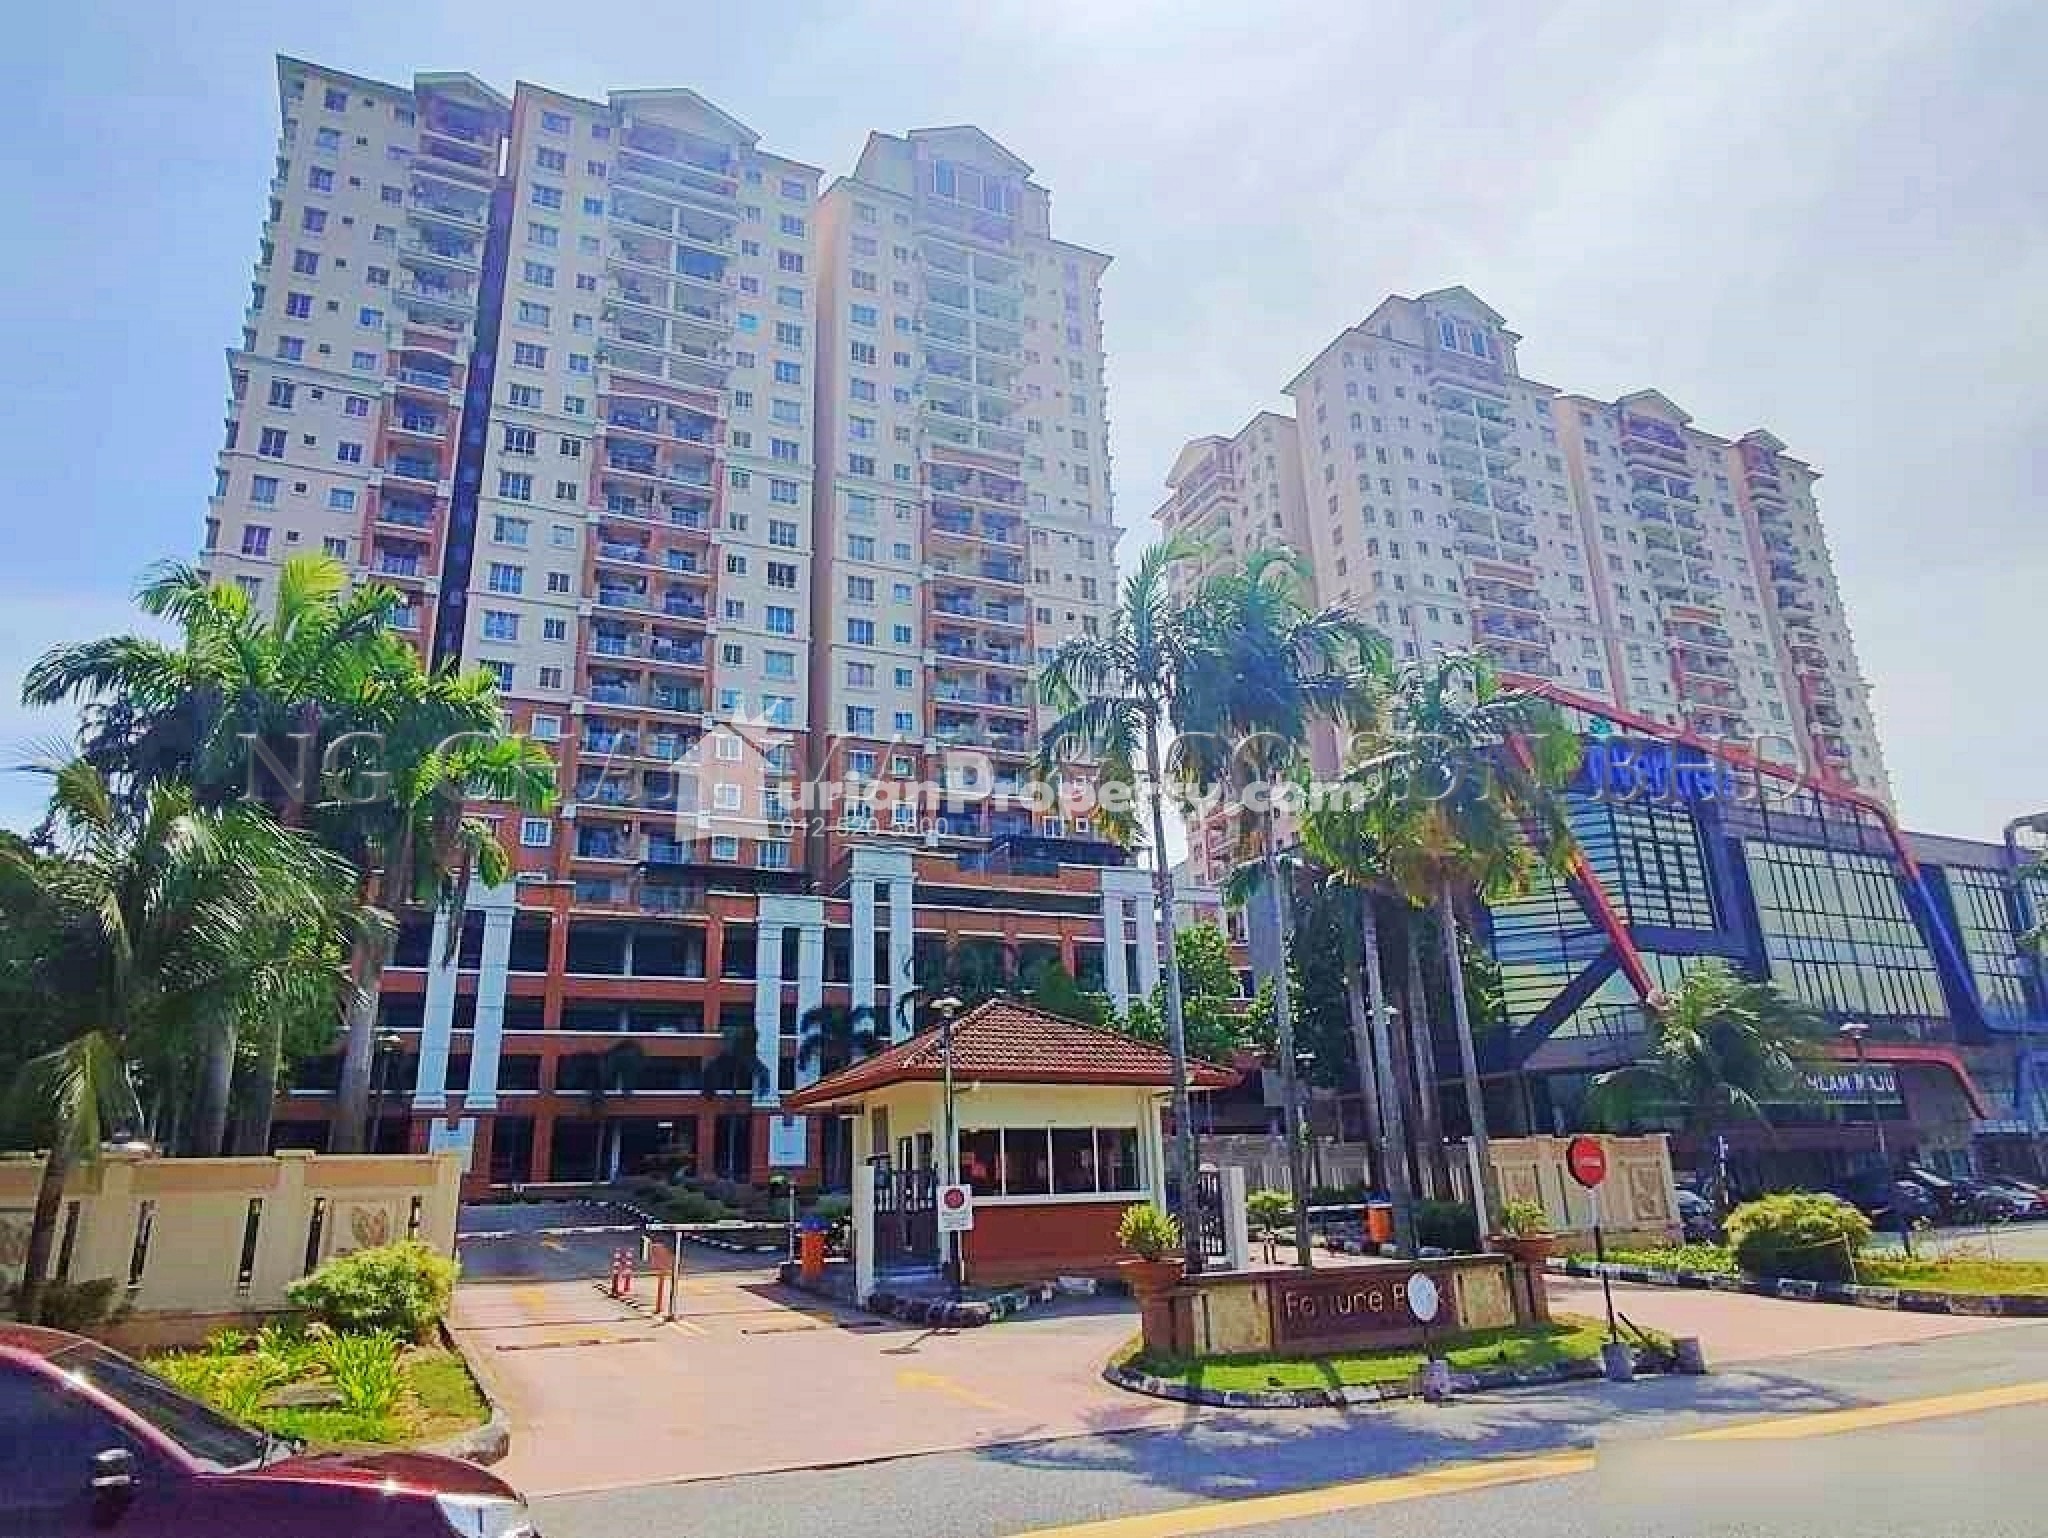 Serviced Residence For Auction at Fortune Park